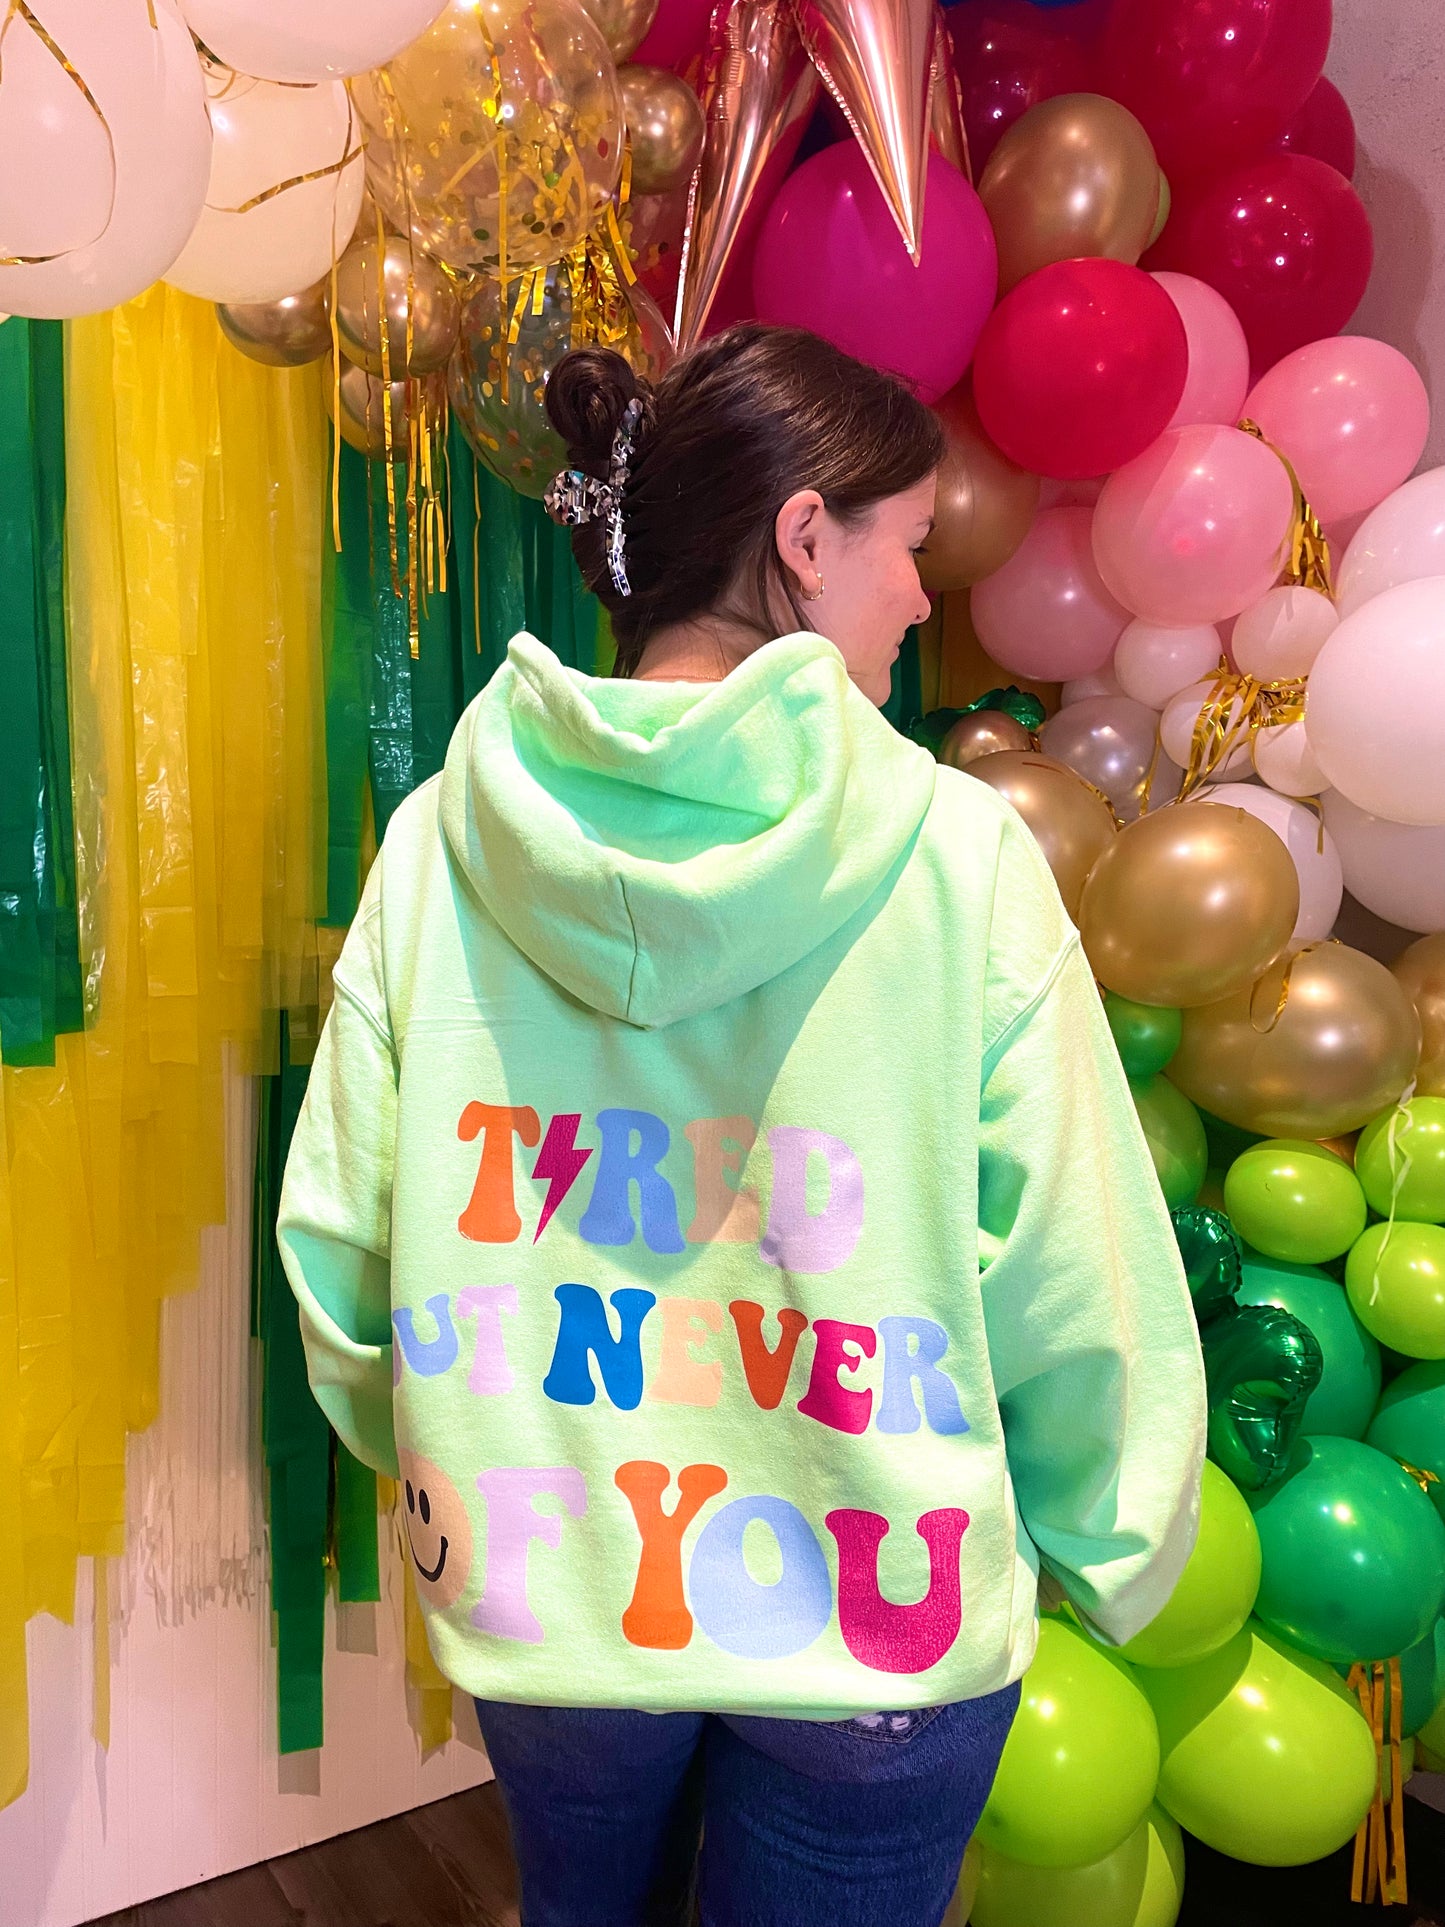 Tired but never of you hoodie